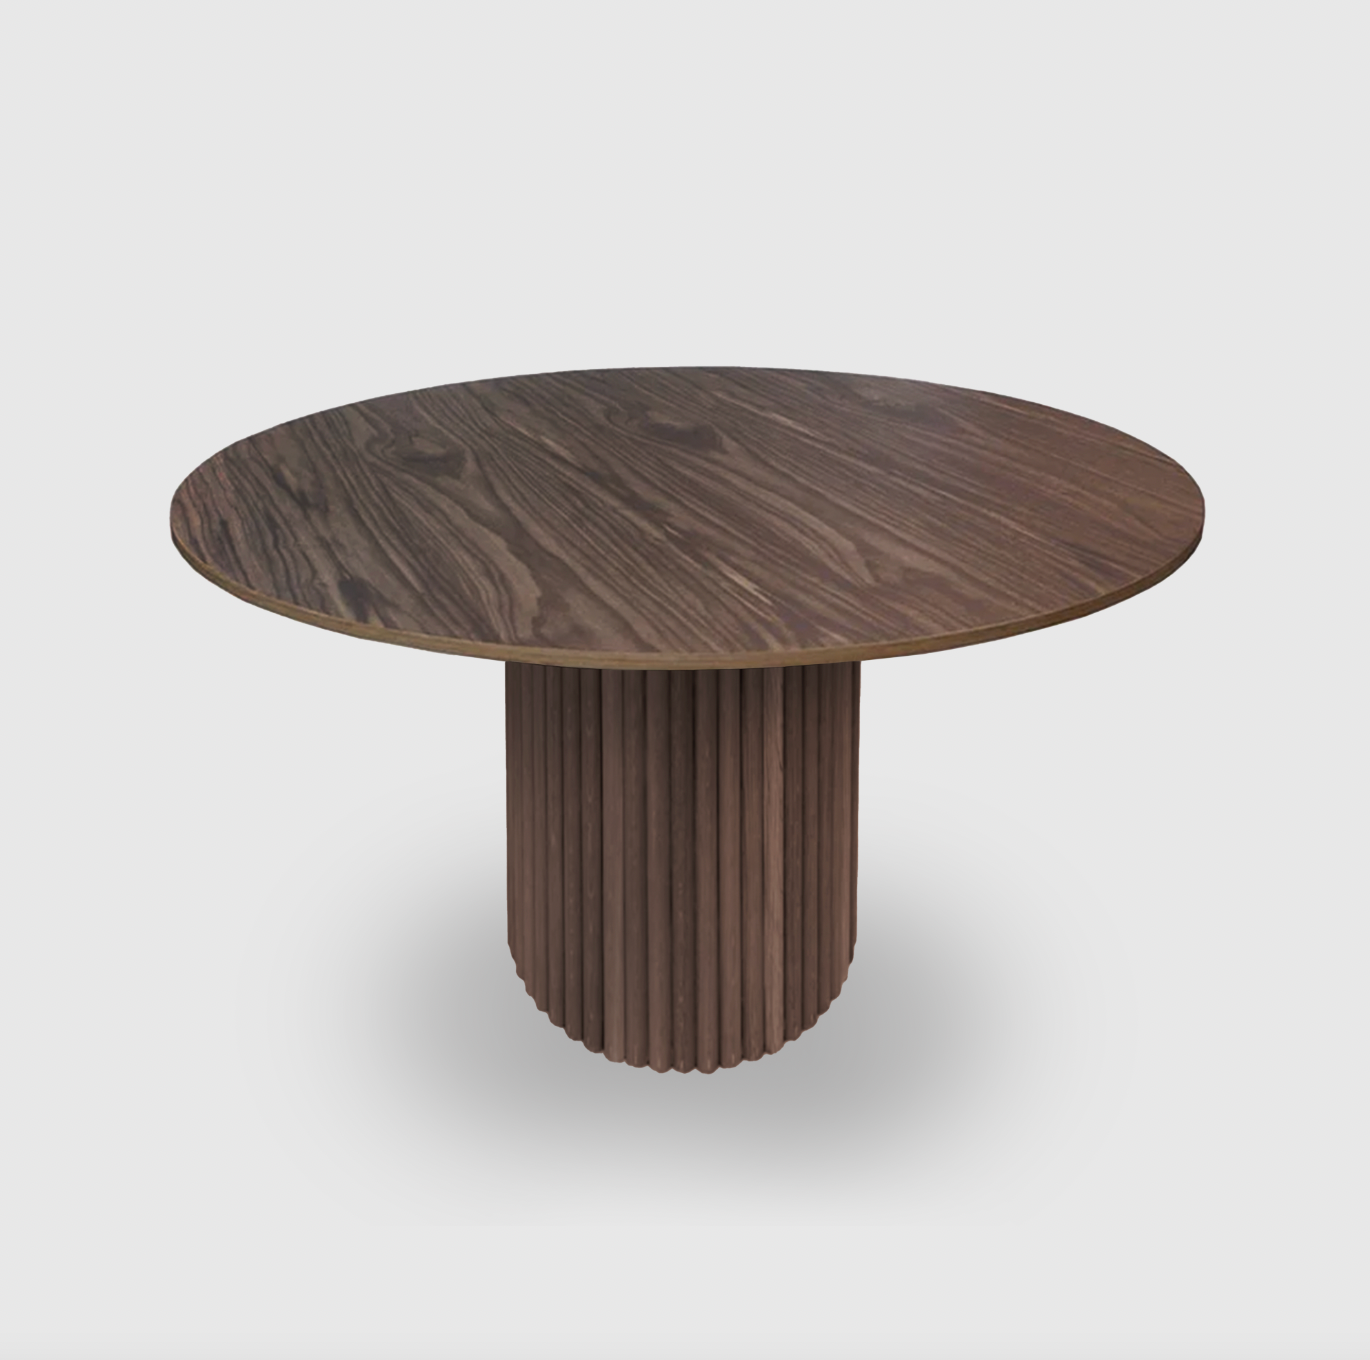 Bloom Round Dining Table - White Ply